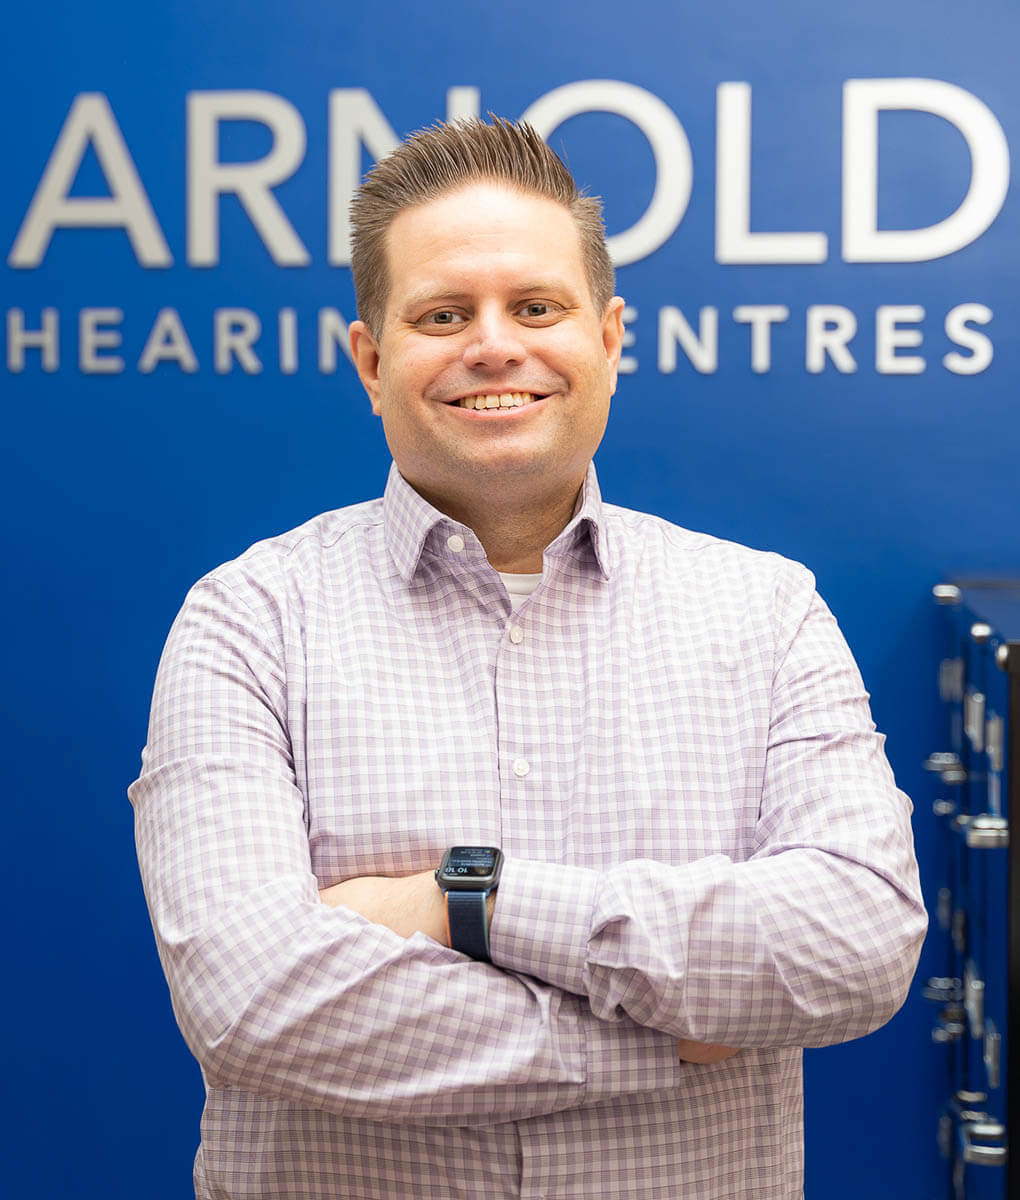 Chris Arnold, Owner & Hearing Instrument Specialist